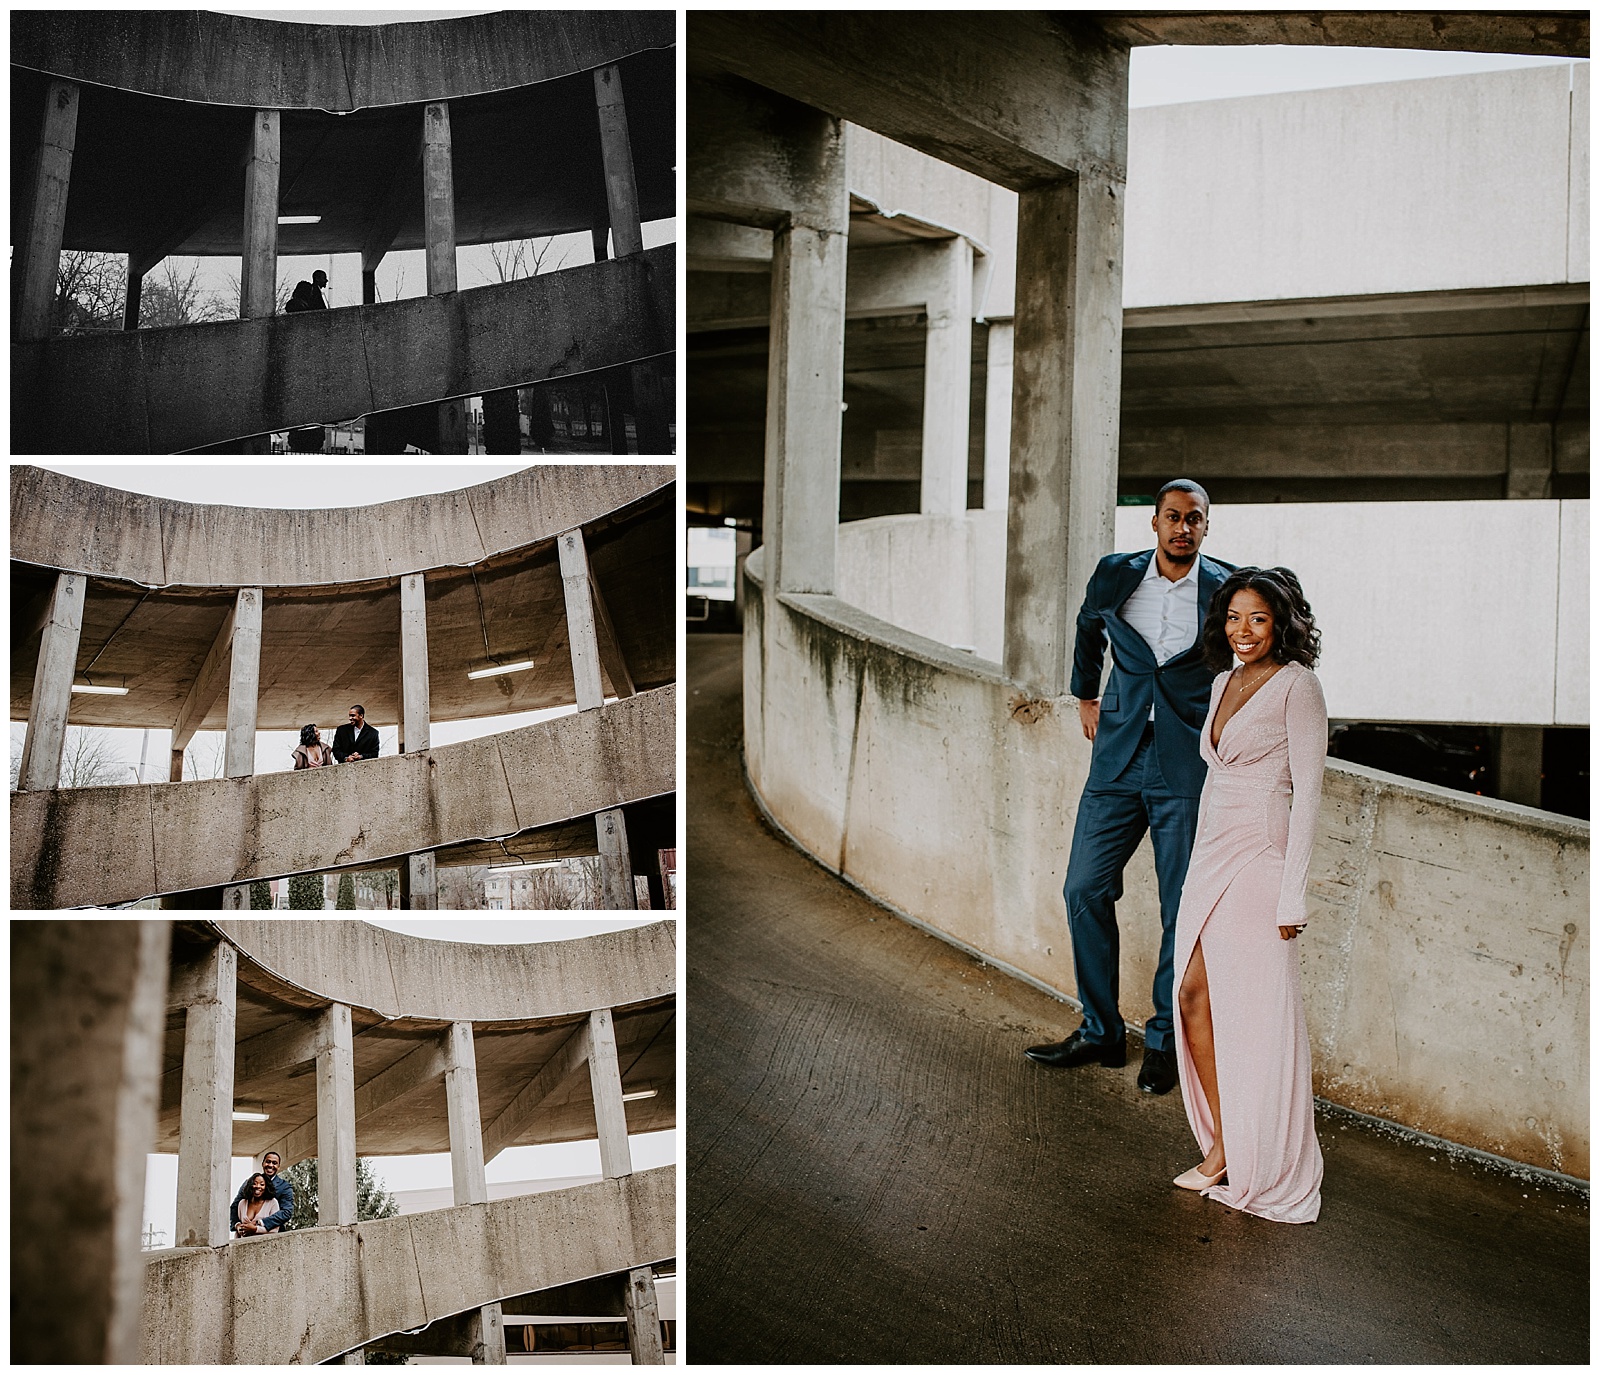 Grand Rapids Engagment Photographer Black Photography Wedding African American couples Michigan Detroit Wedding and elopement